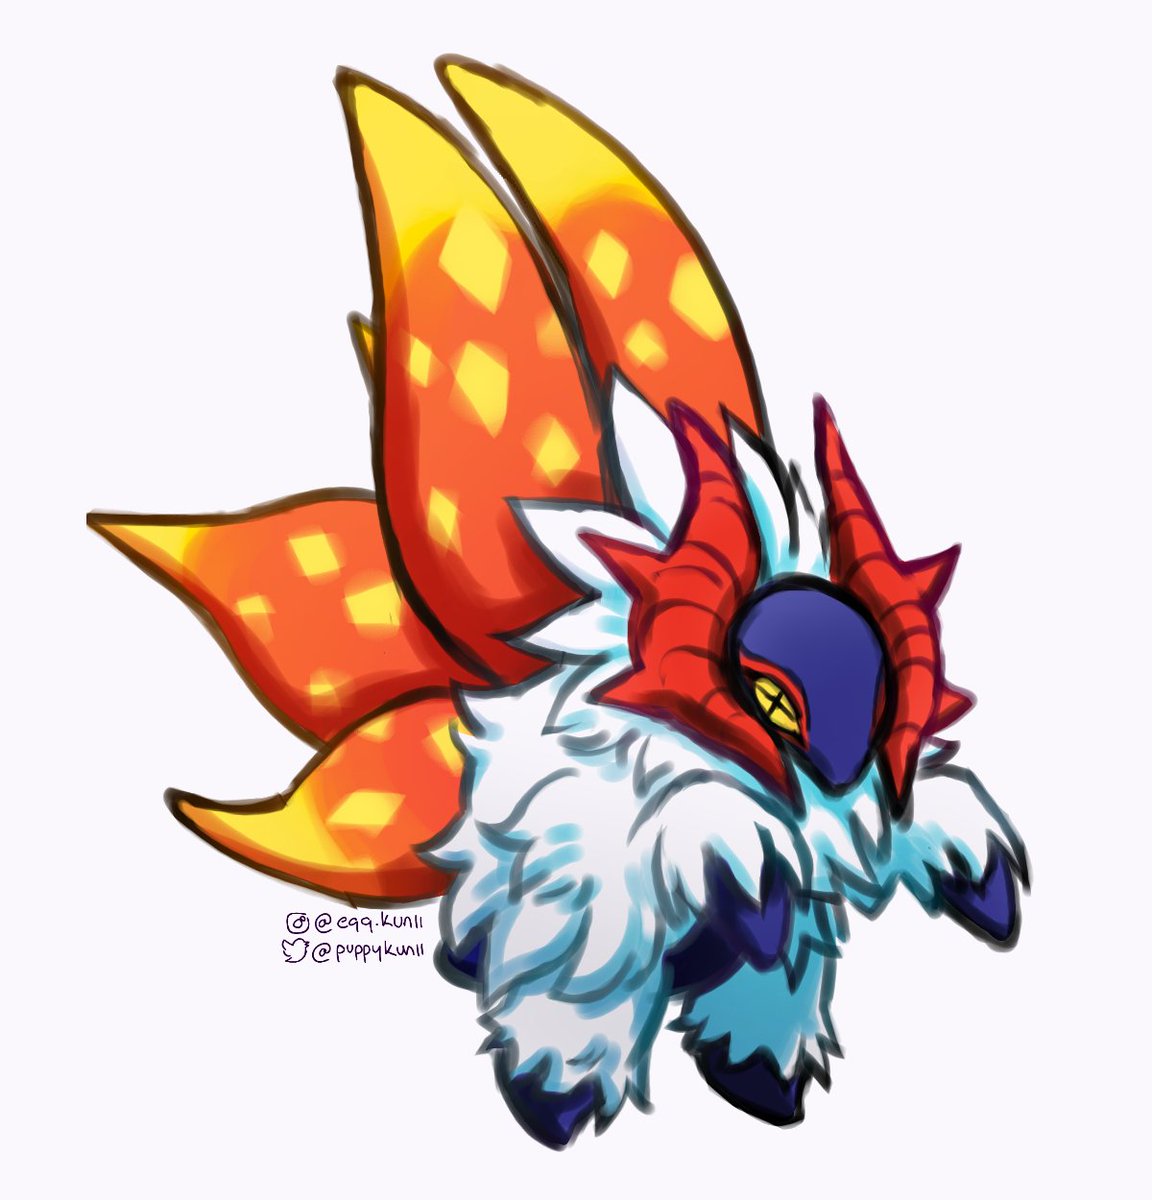 Ryan on X: New Volcarona, Slither Wing that was leaked. #pokemon